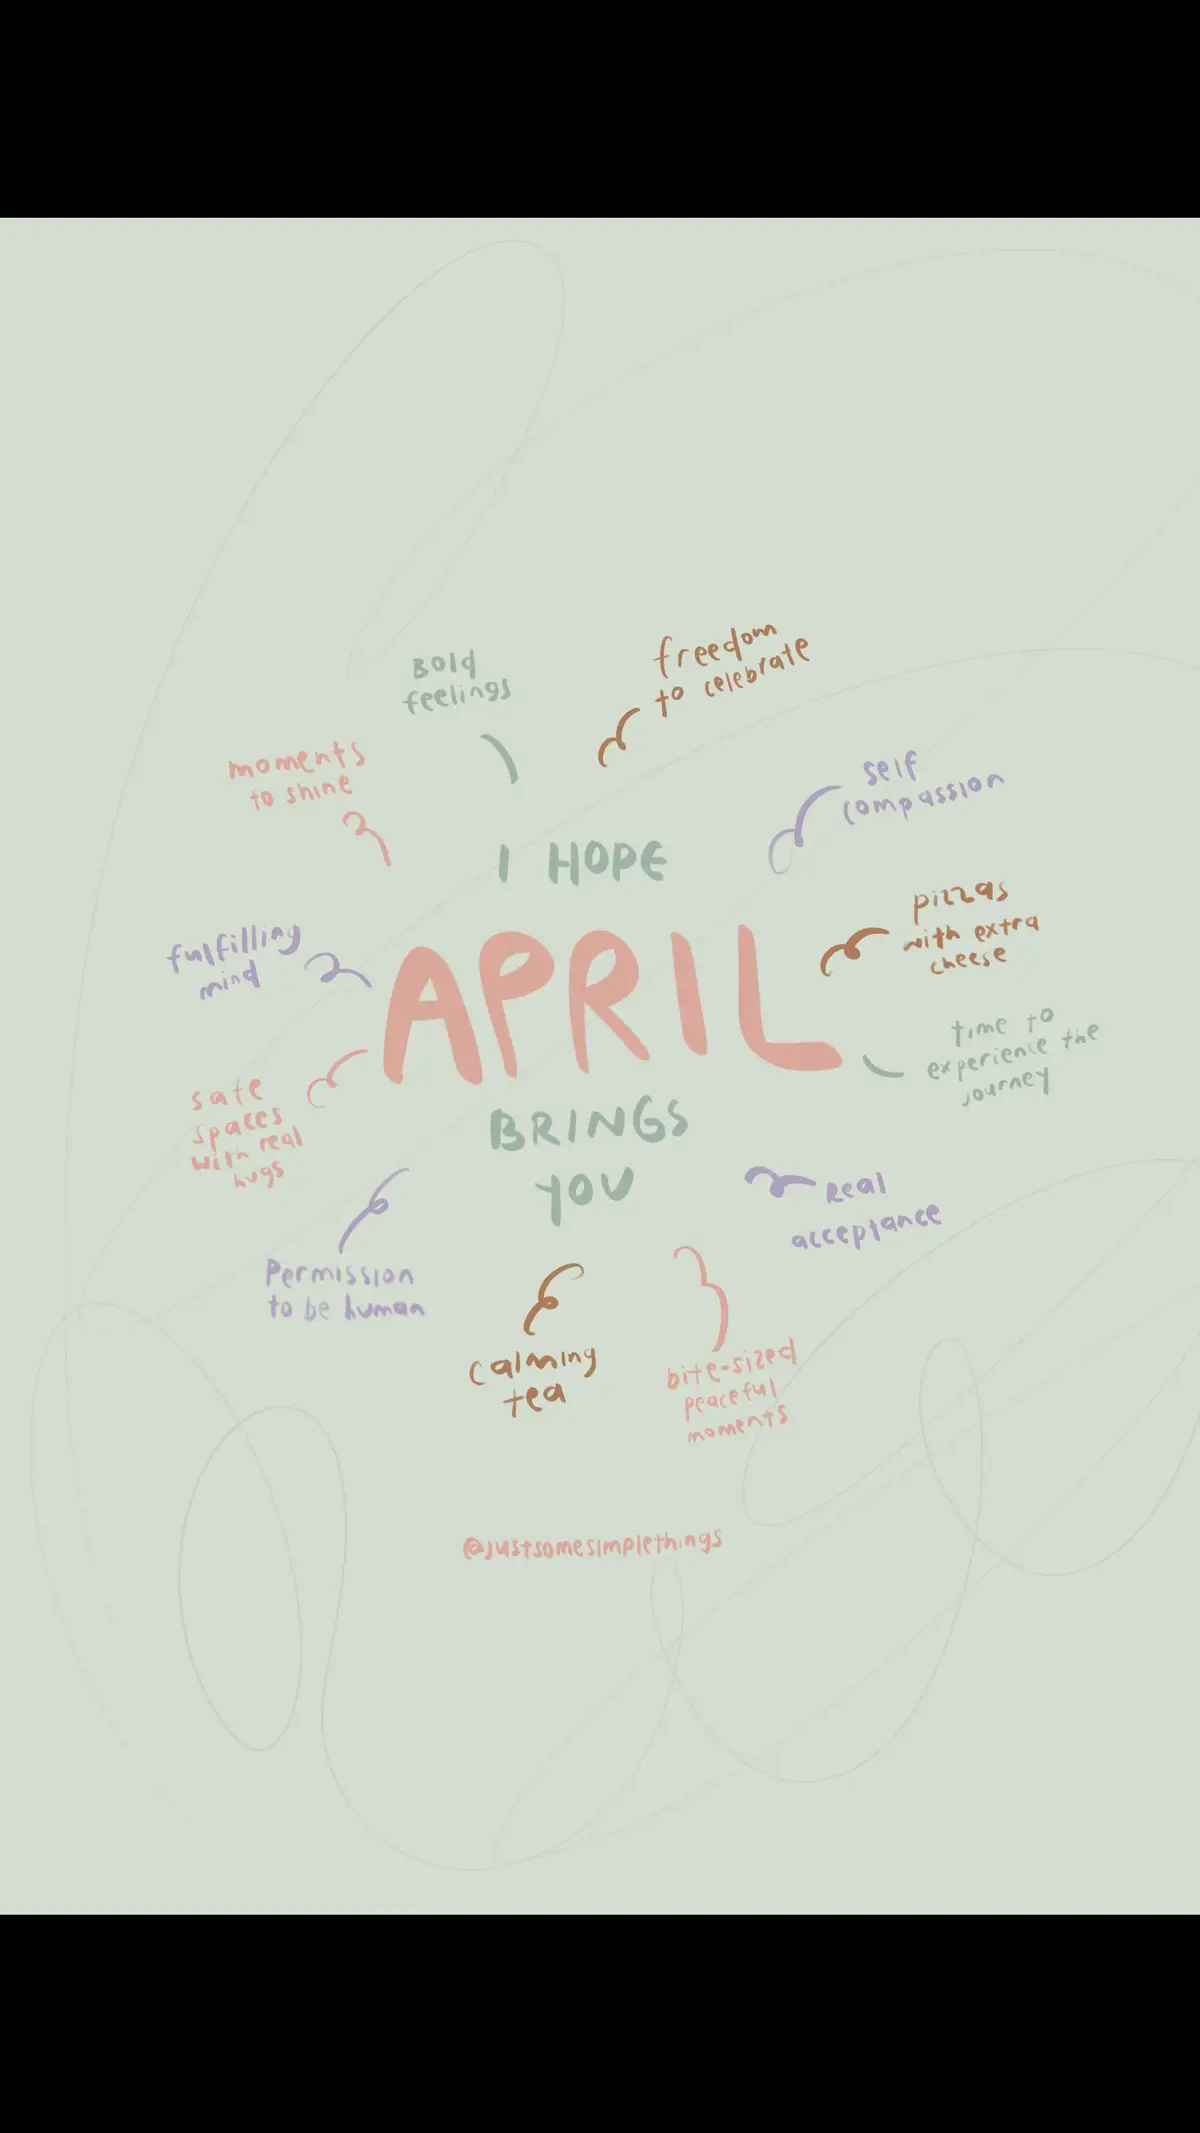 I hope April brings you all that bold feelings, safe spaces and real acceptance 🤍 #helloapril🌸 #aprilaffirmations #april #monthlyaffirmation #aprilishere